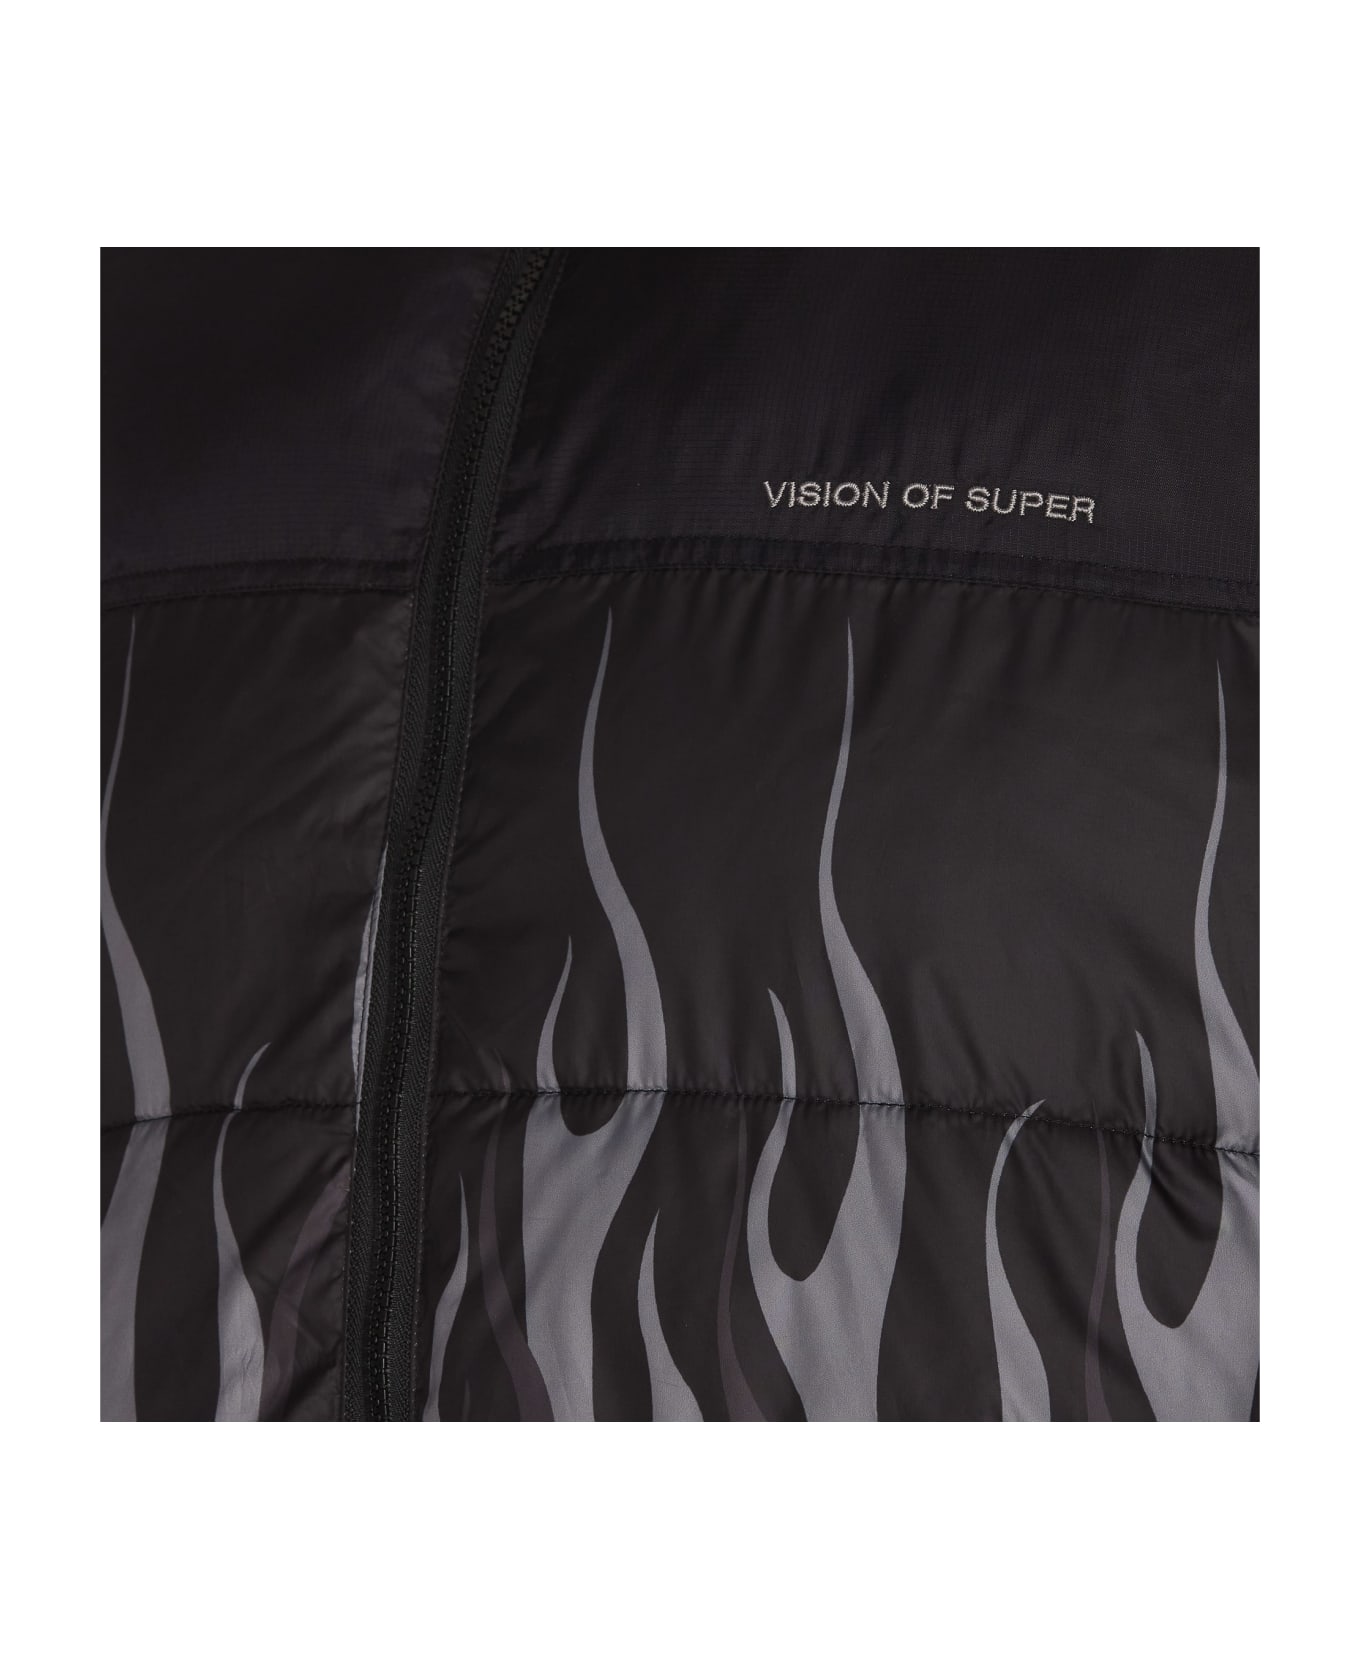 Vision of Super Puffy Down Jacket With Black Flames - Black